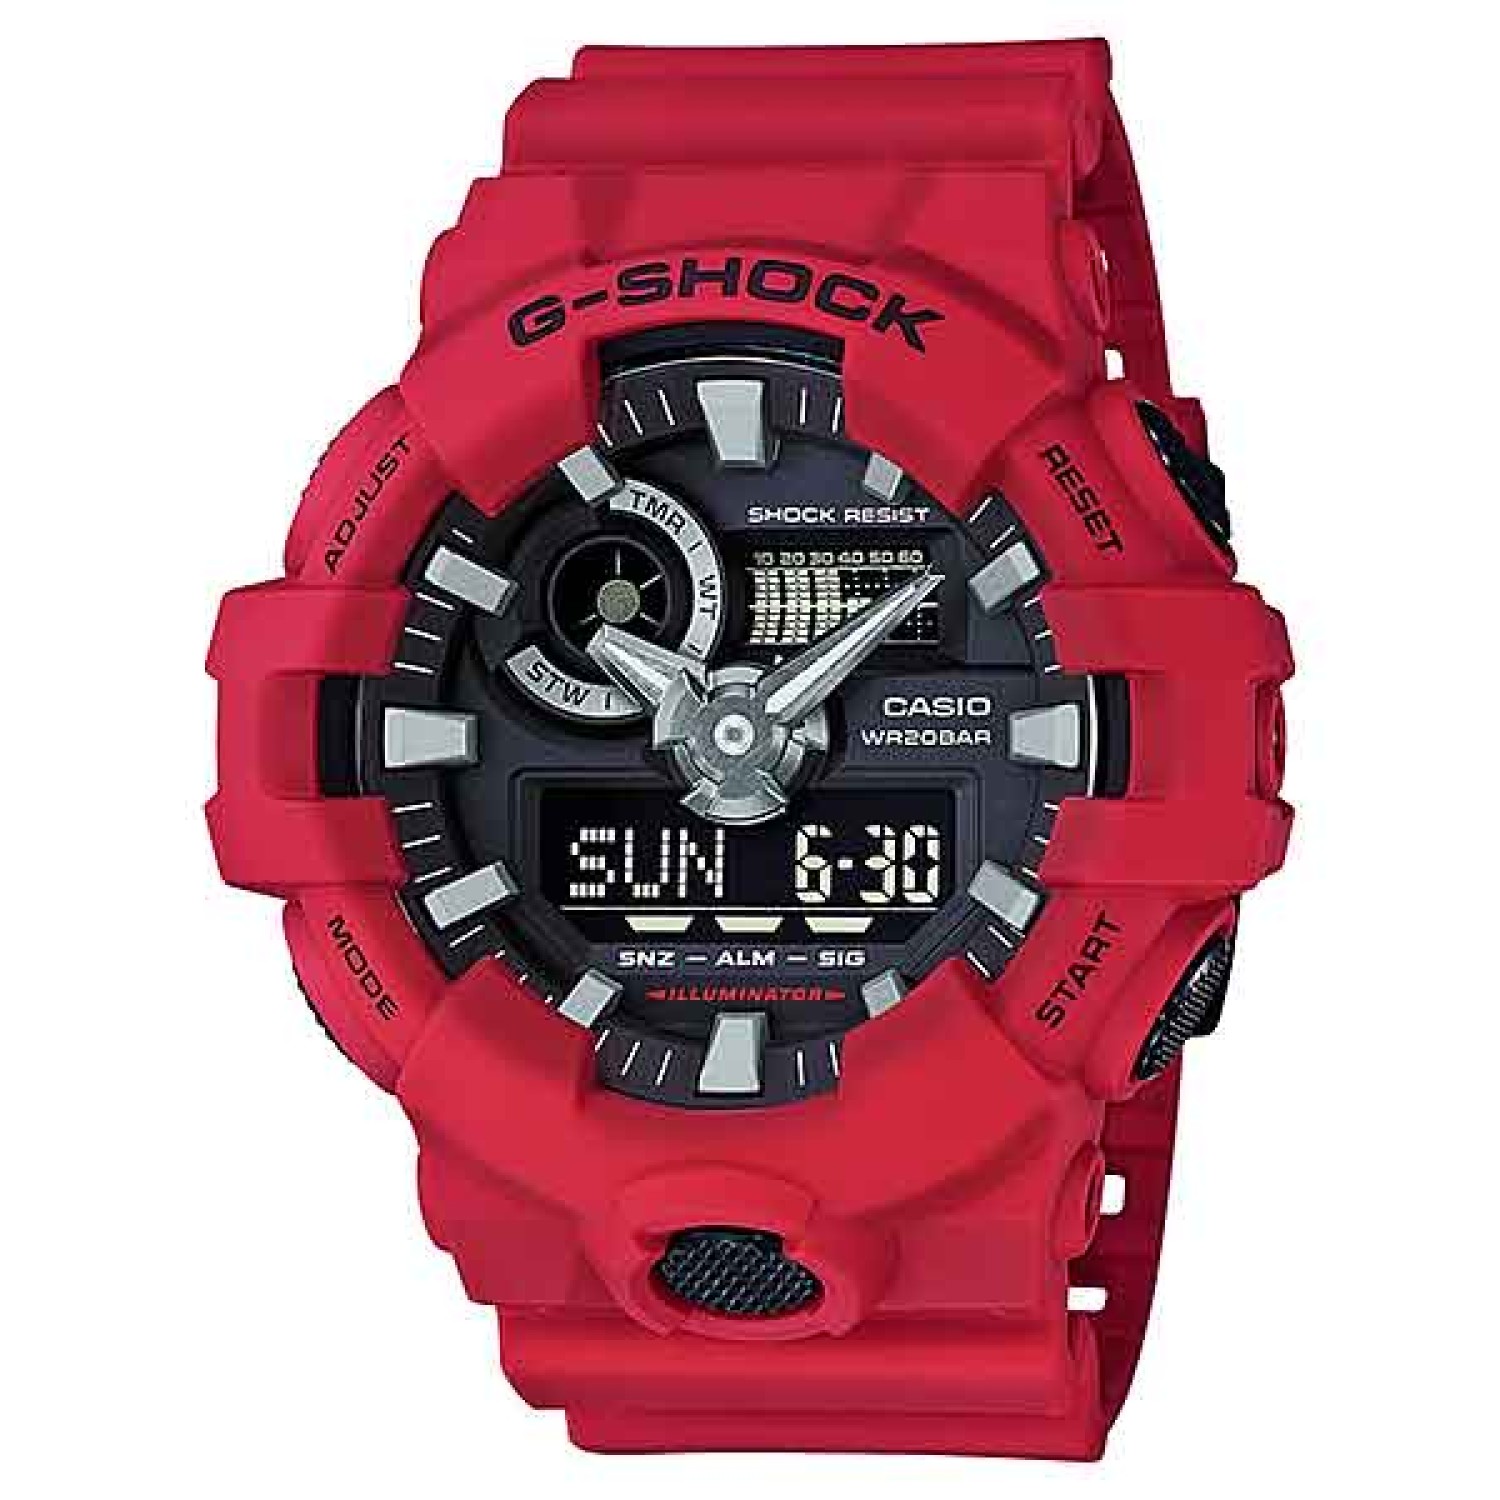 GA700-4A G-SHOCK  Analogue Digital. From G-SHOCK, the watch brand that is constantly setting new standards for timekeeping toughness, comes the new GA-700 analog/digital combination model. Multi-dimensional hour and minute hands look as if they were ca ca